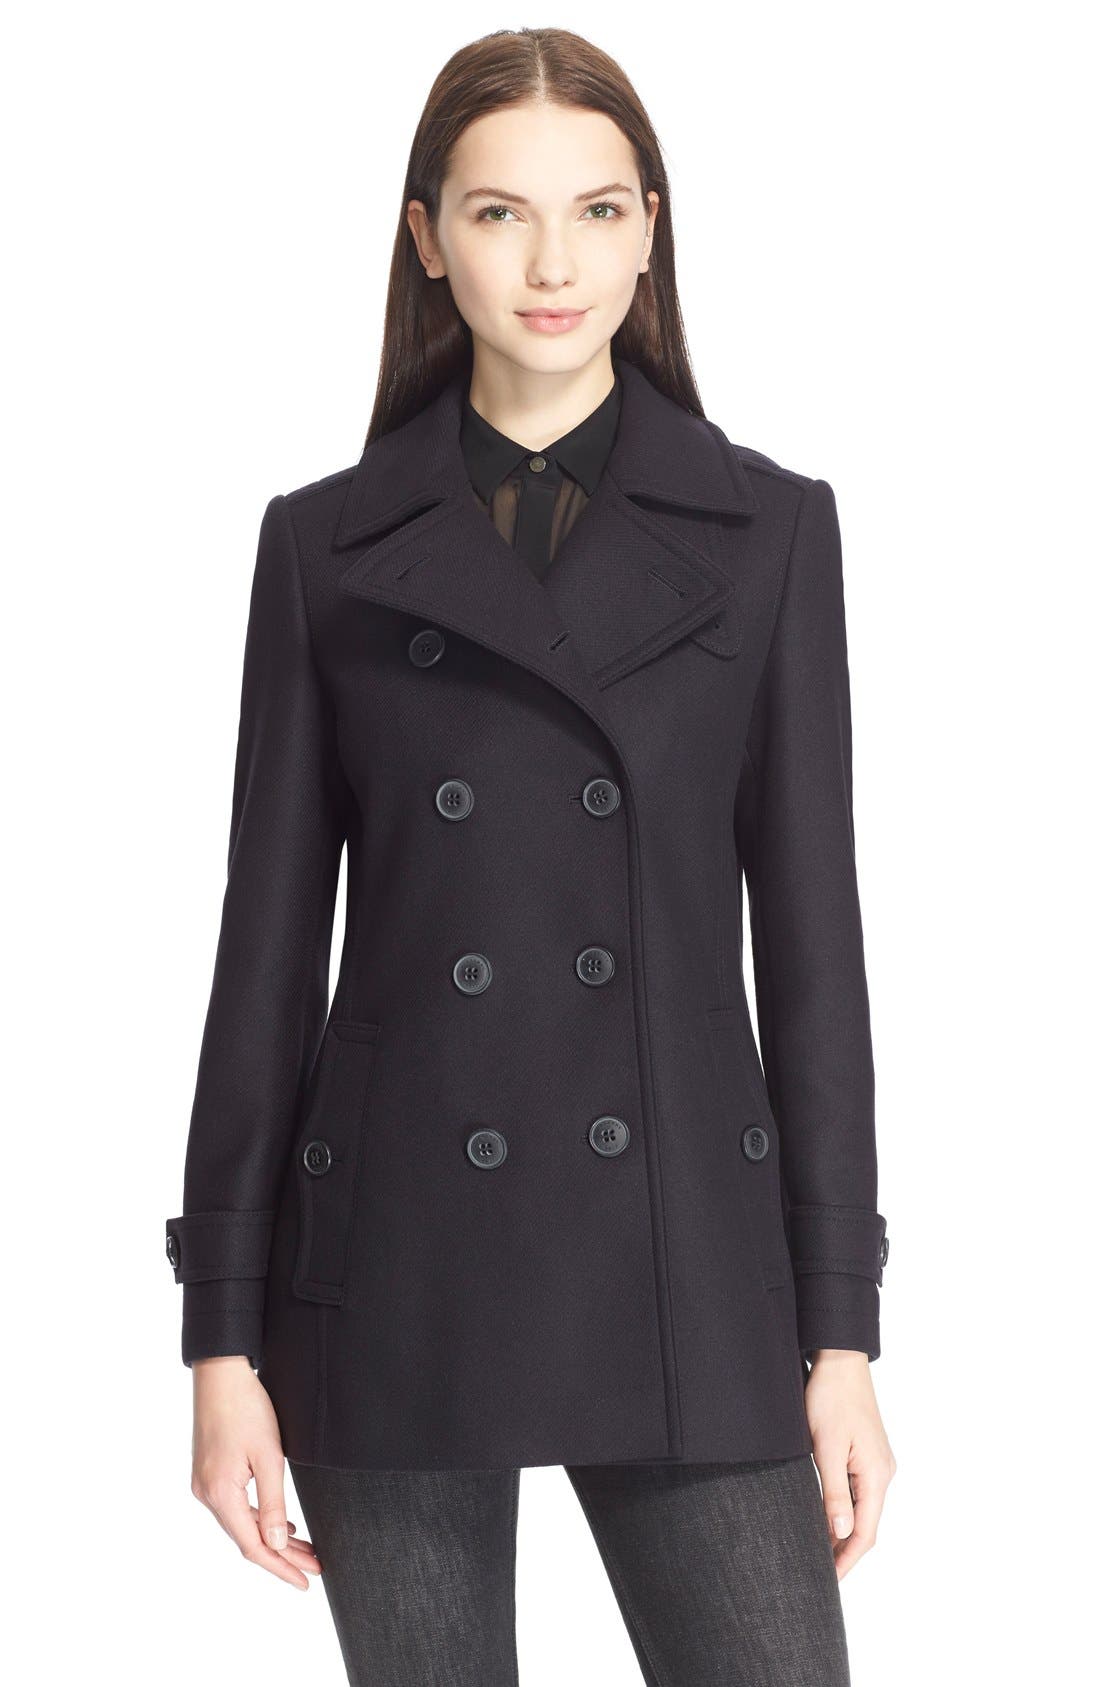 Burberry Black Pea Coat Outlet, SAVE 33% 